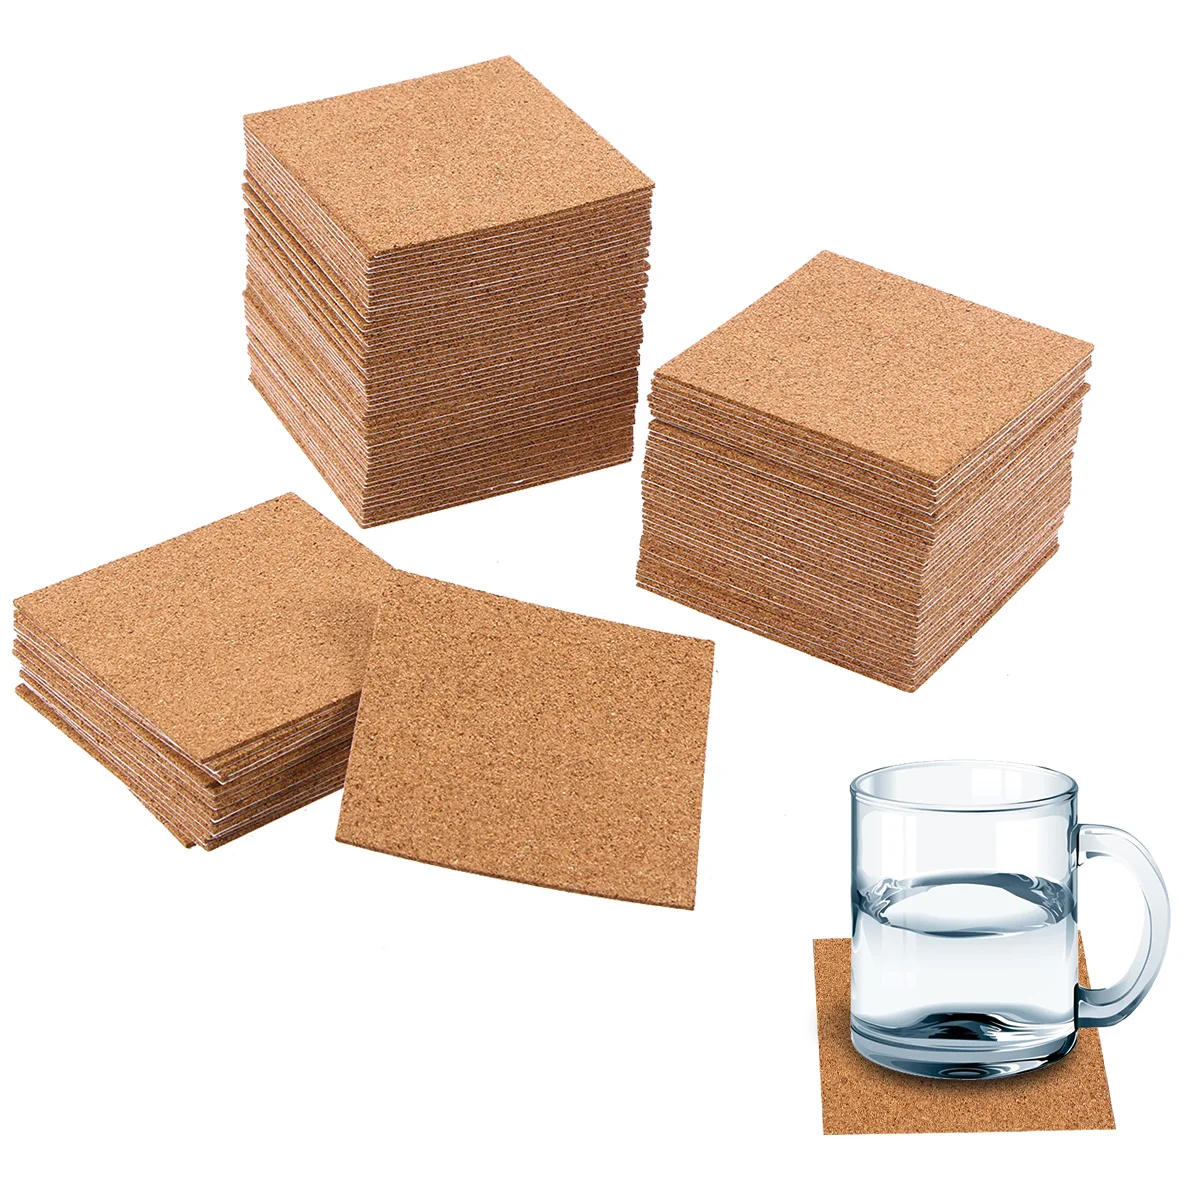 

Cork Adhesive Self Coasters Sheets Pads Backing Coaster Cup Mat Square Board Squares Wooden Holder Mats Wood Drink Strip Tiles